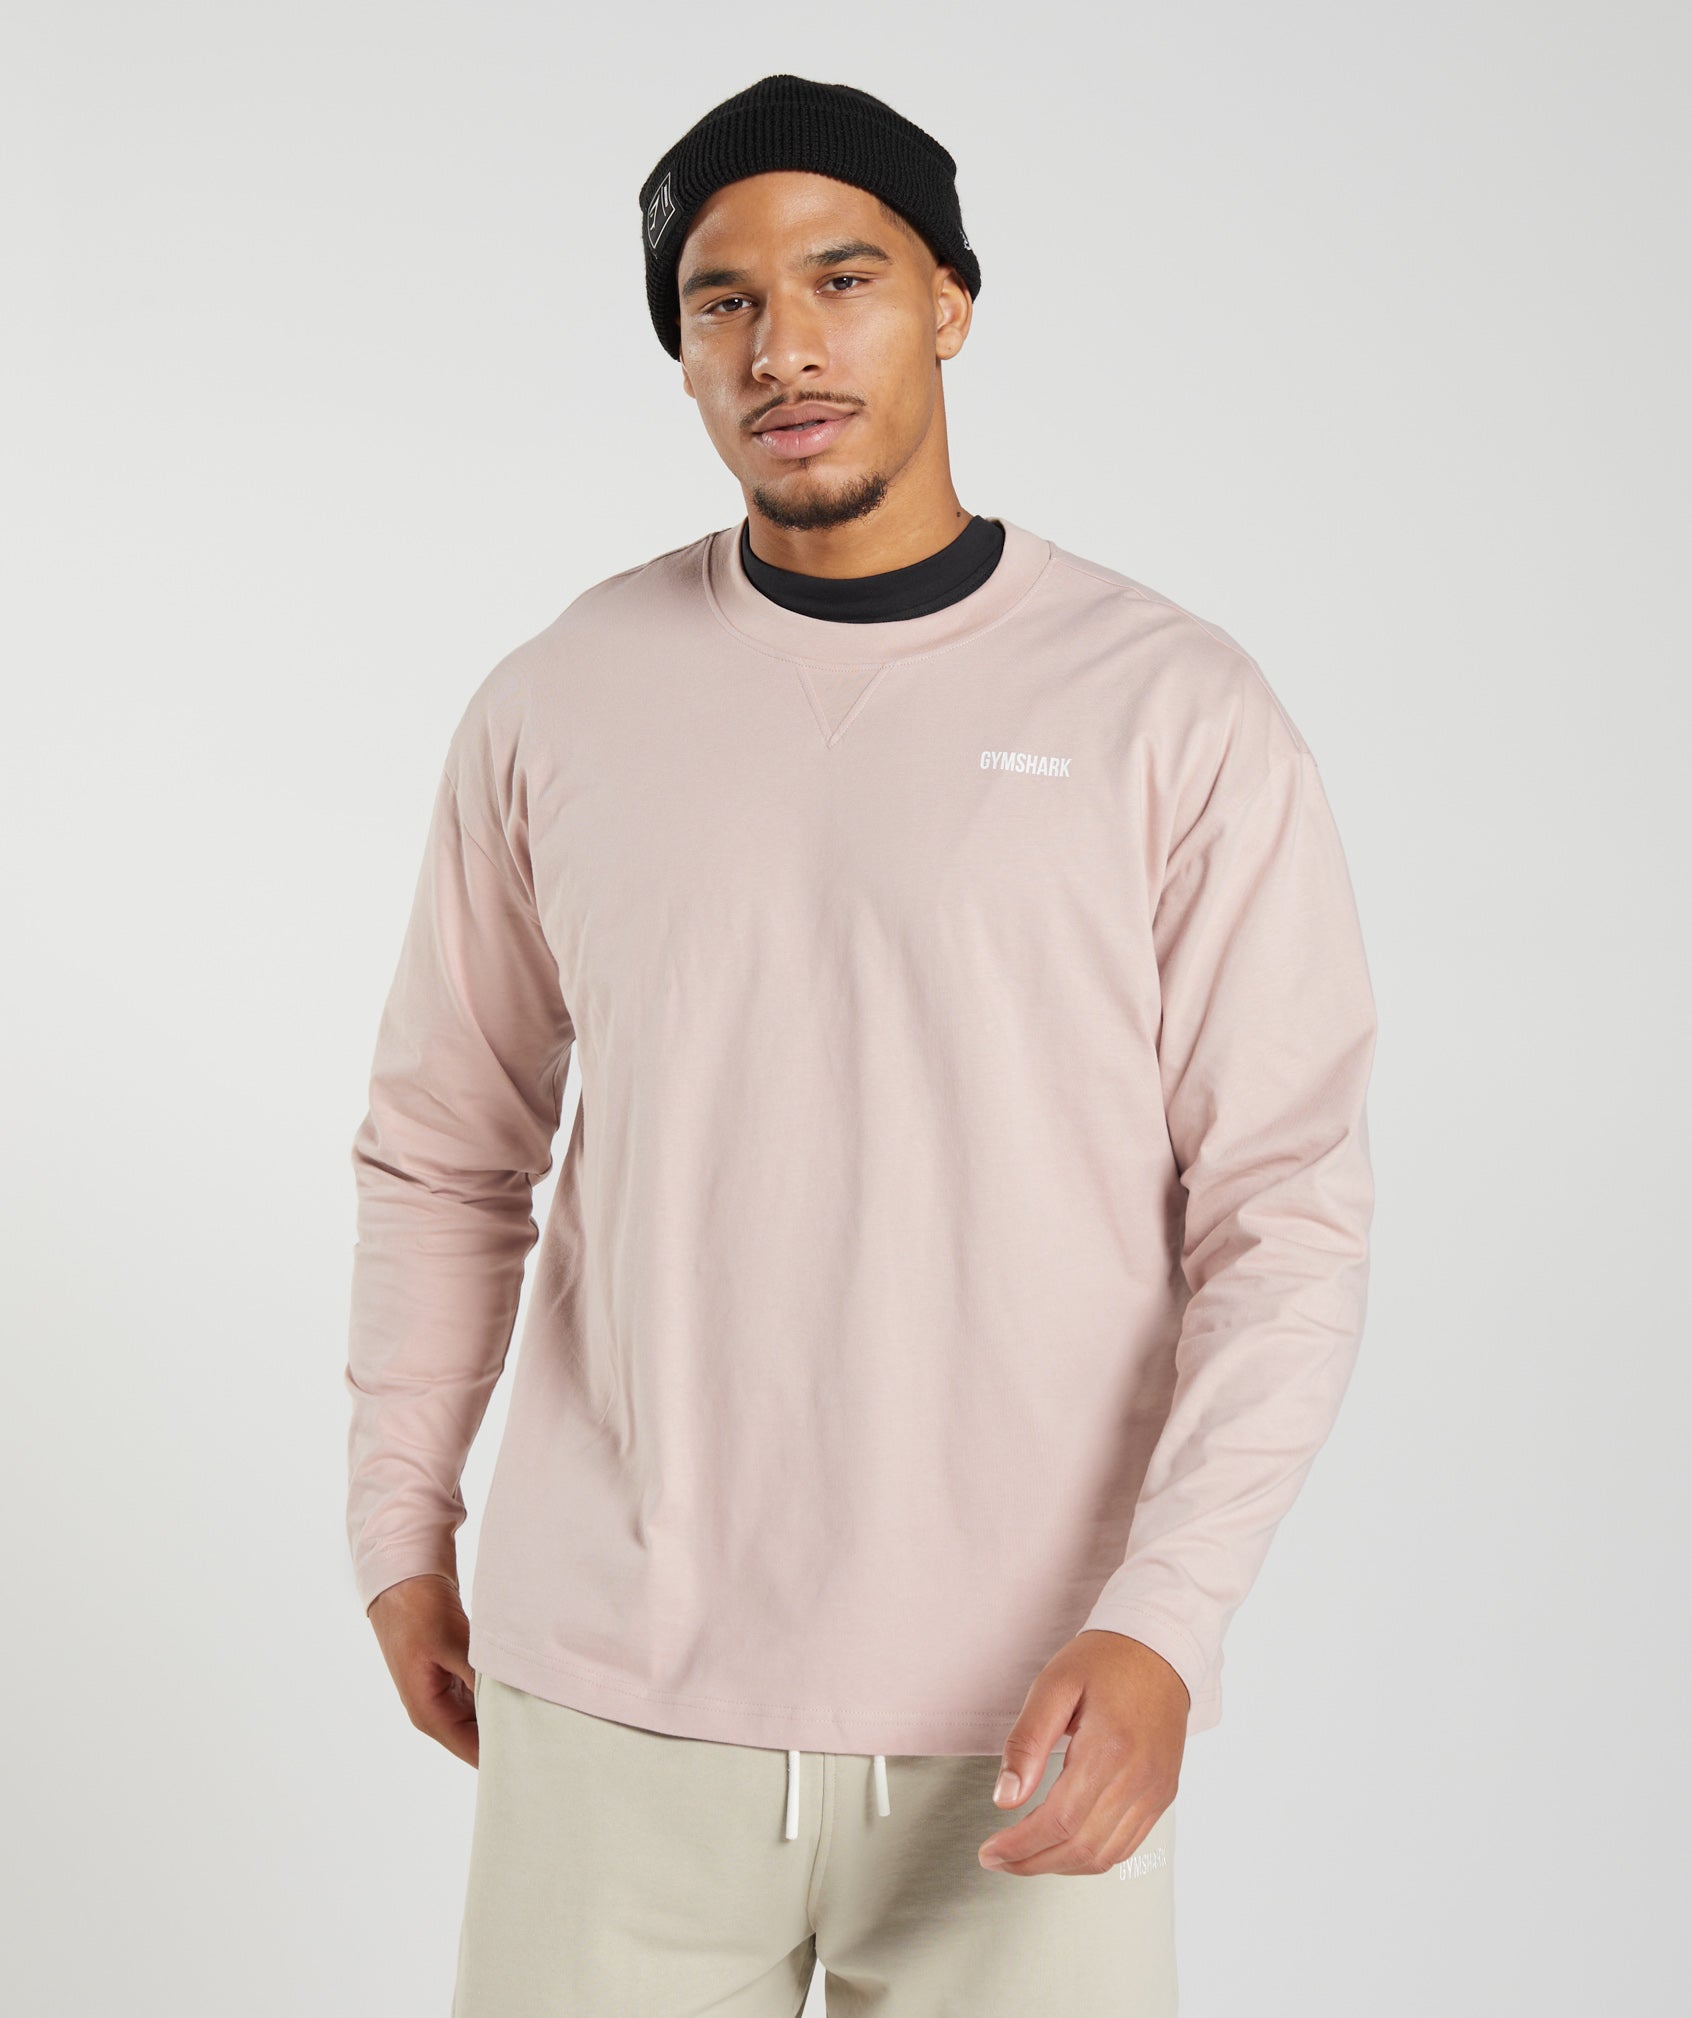 Rest Day Sweats Long Sleeve T-Shirt in Dusty Taupe - view 2